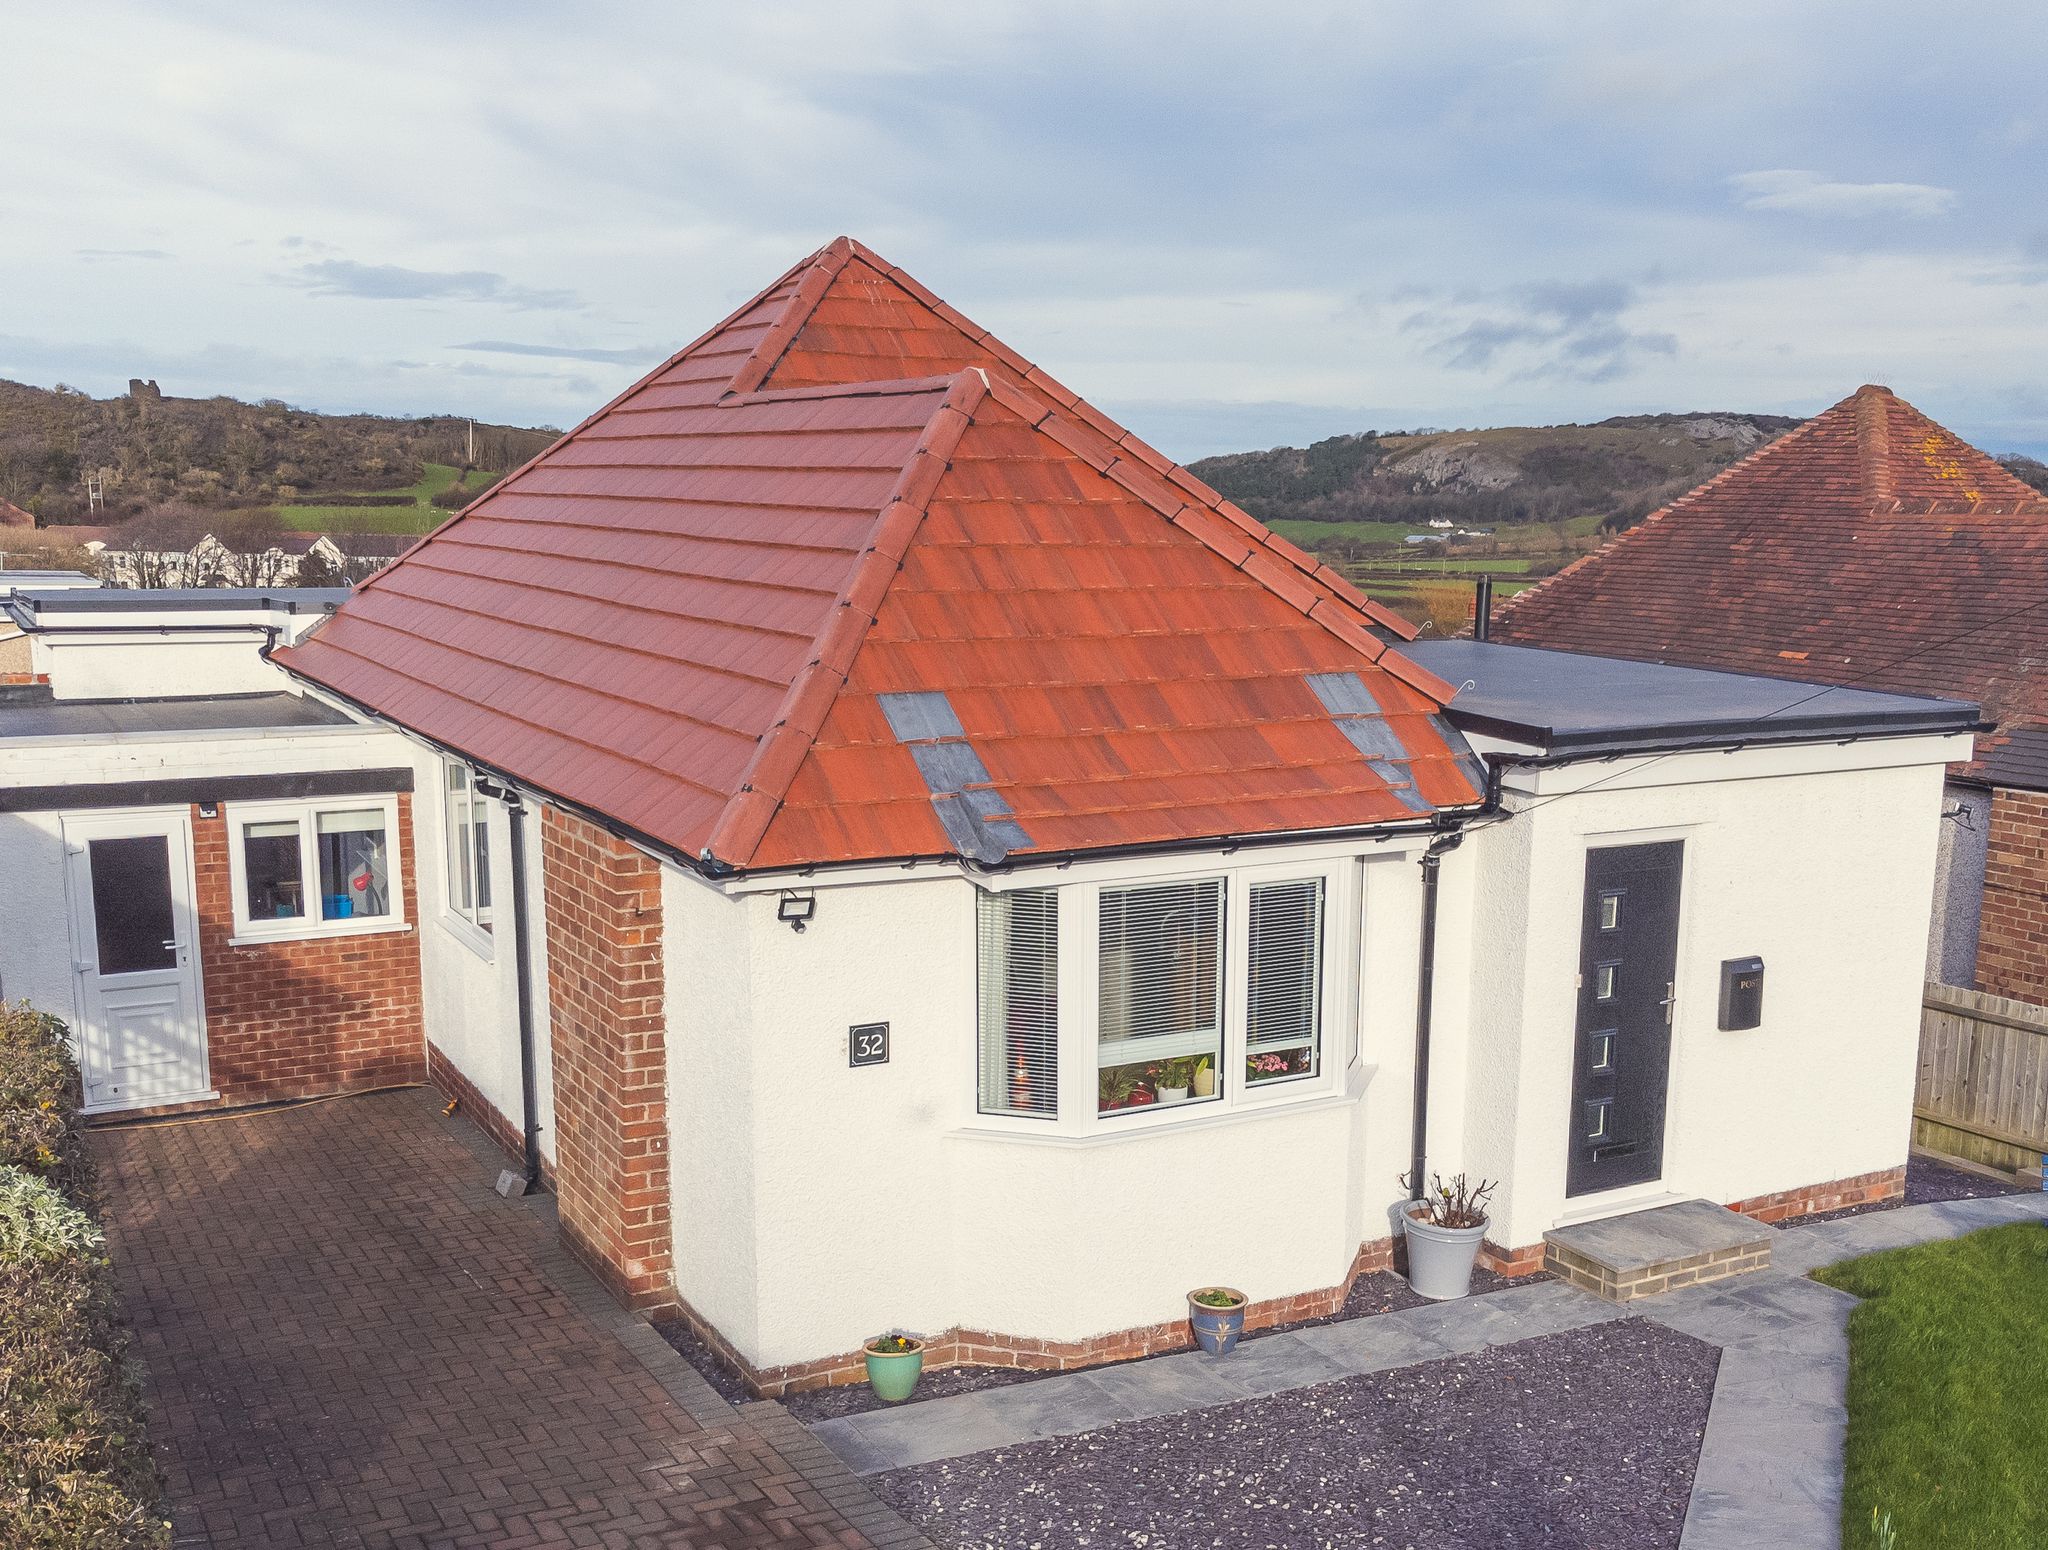 Tile Roof Contractors Trefor, LL54 - DD Roofing